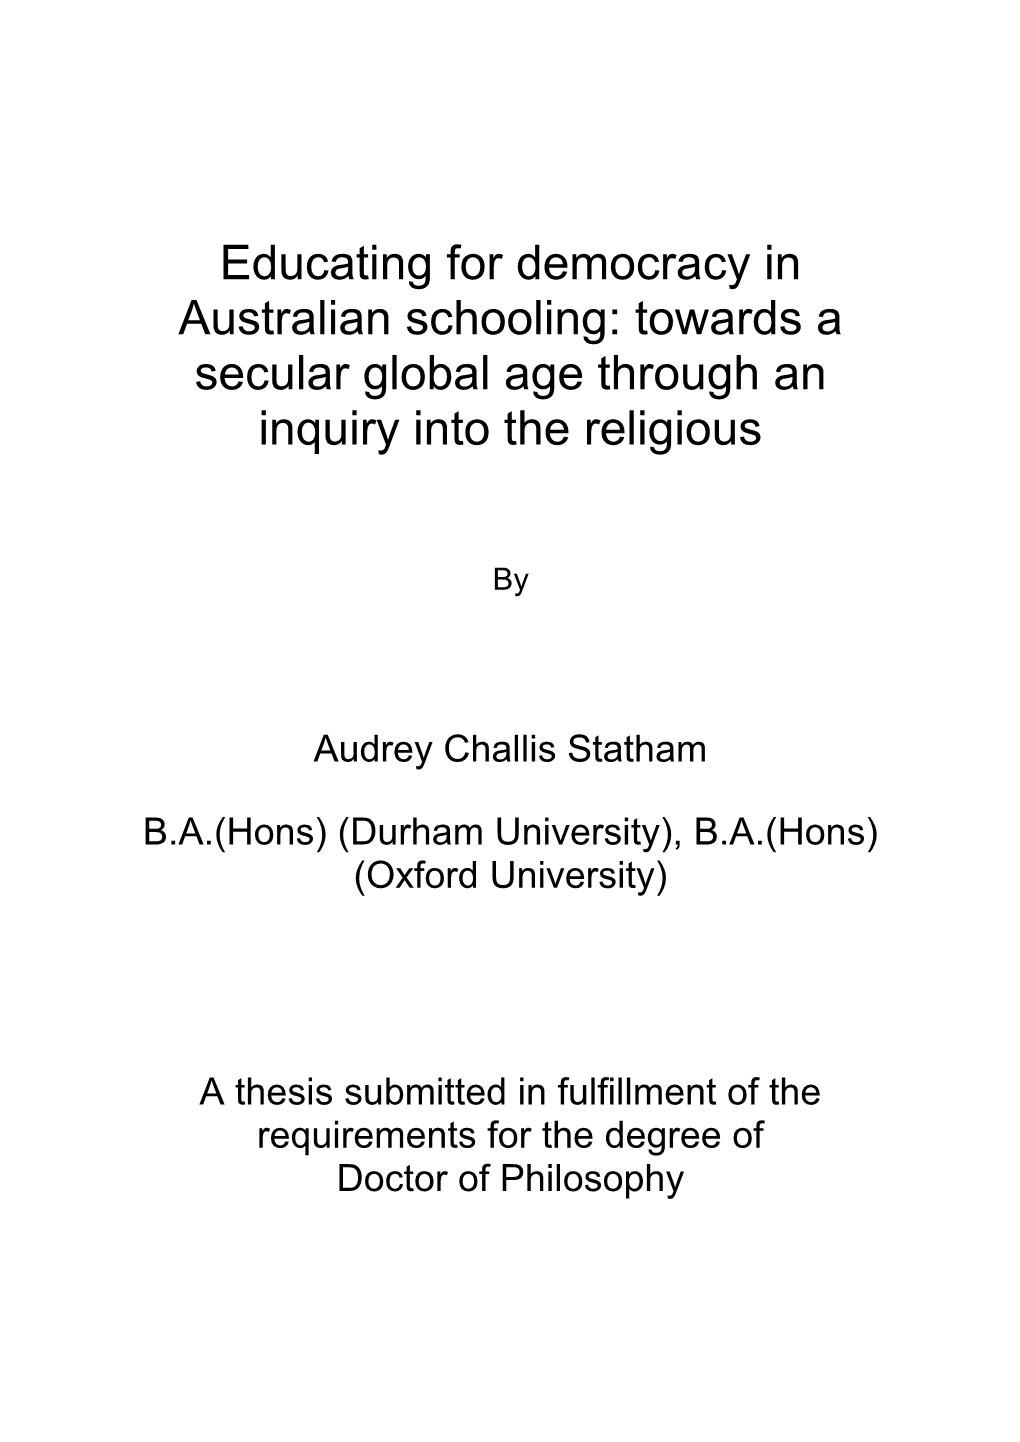 Educating for Democracy in Australian Schooling: Towards a Secular Global Age Through an Inquiry Into the Religious